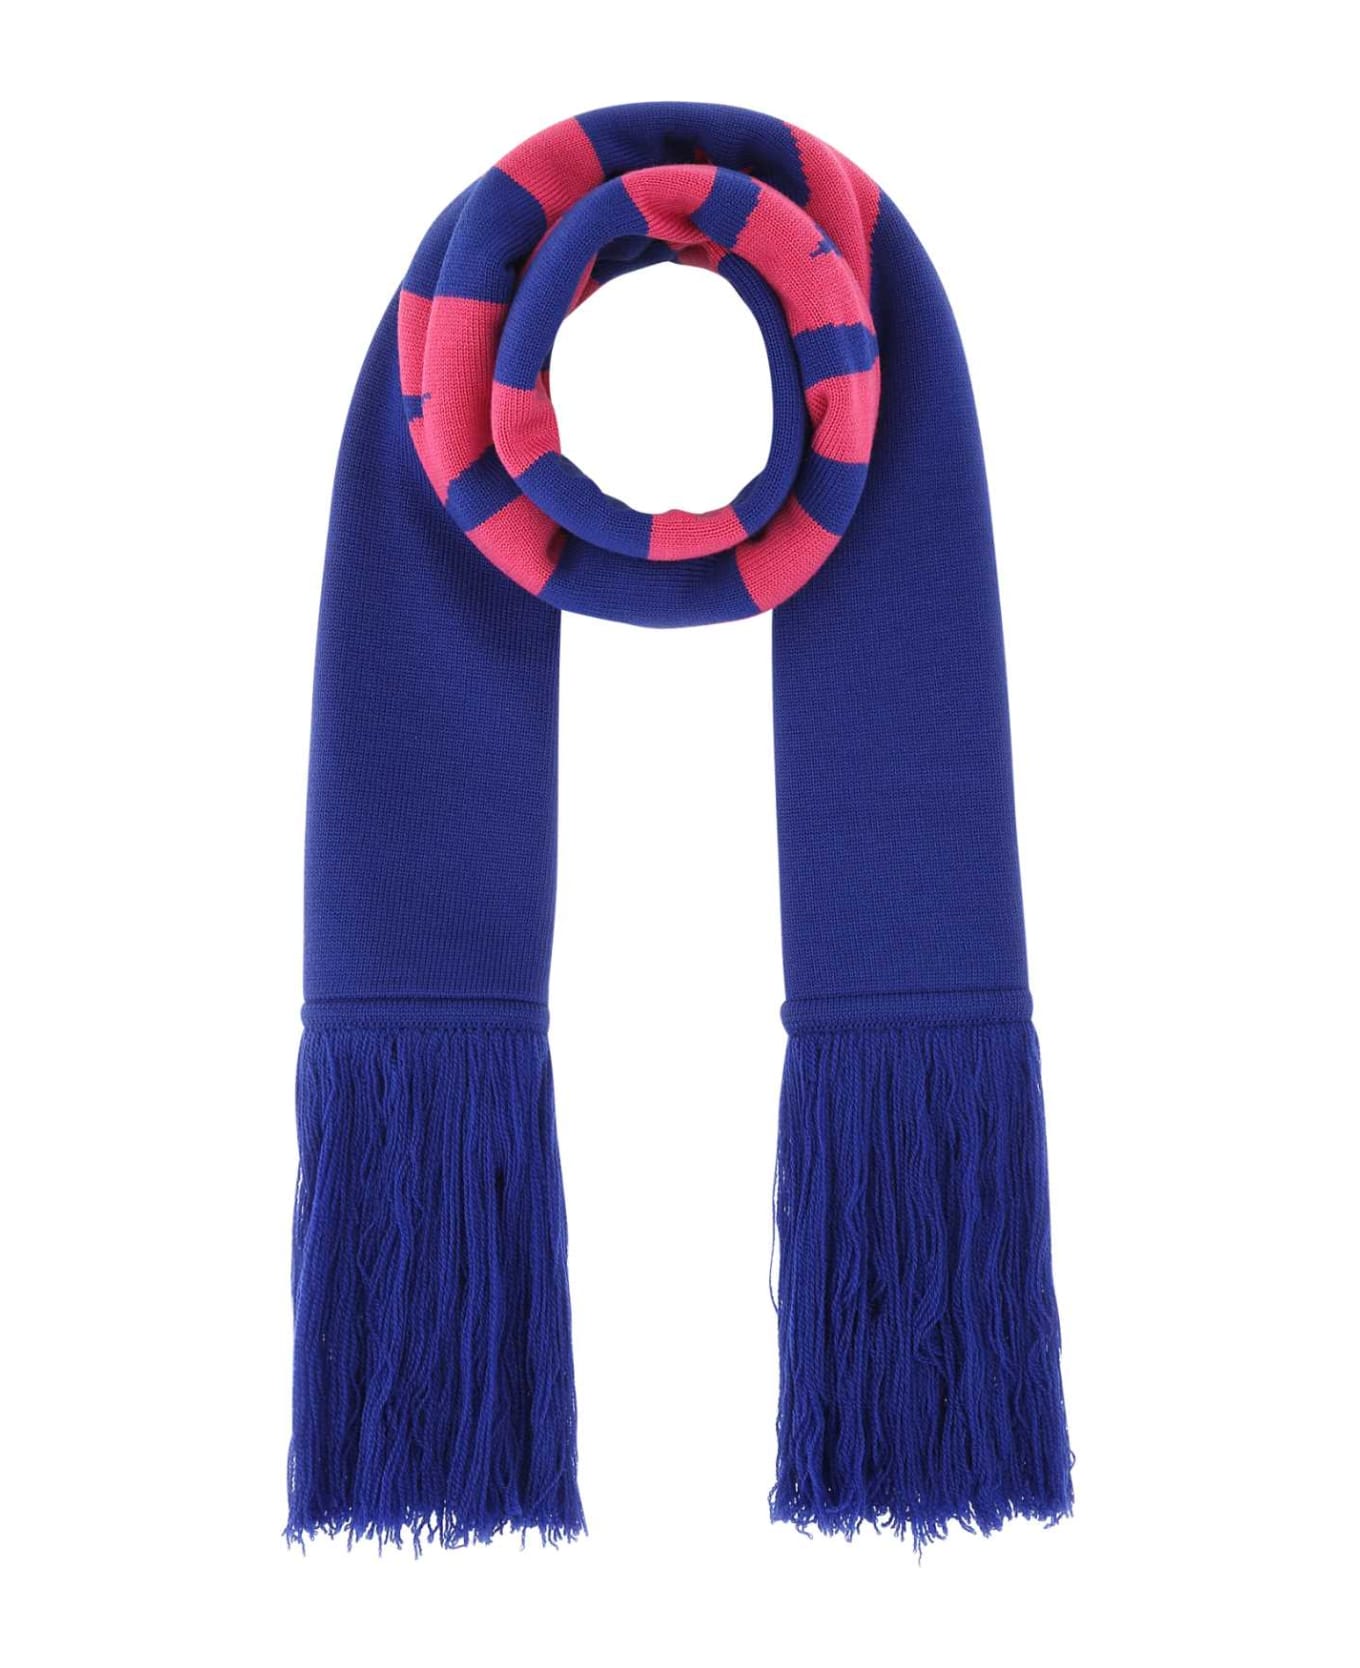 VETEMENTS Embroidered Wool Scarf - ROYALBLUE